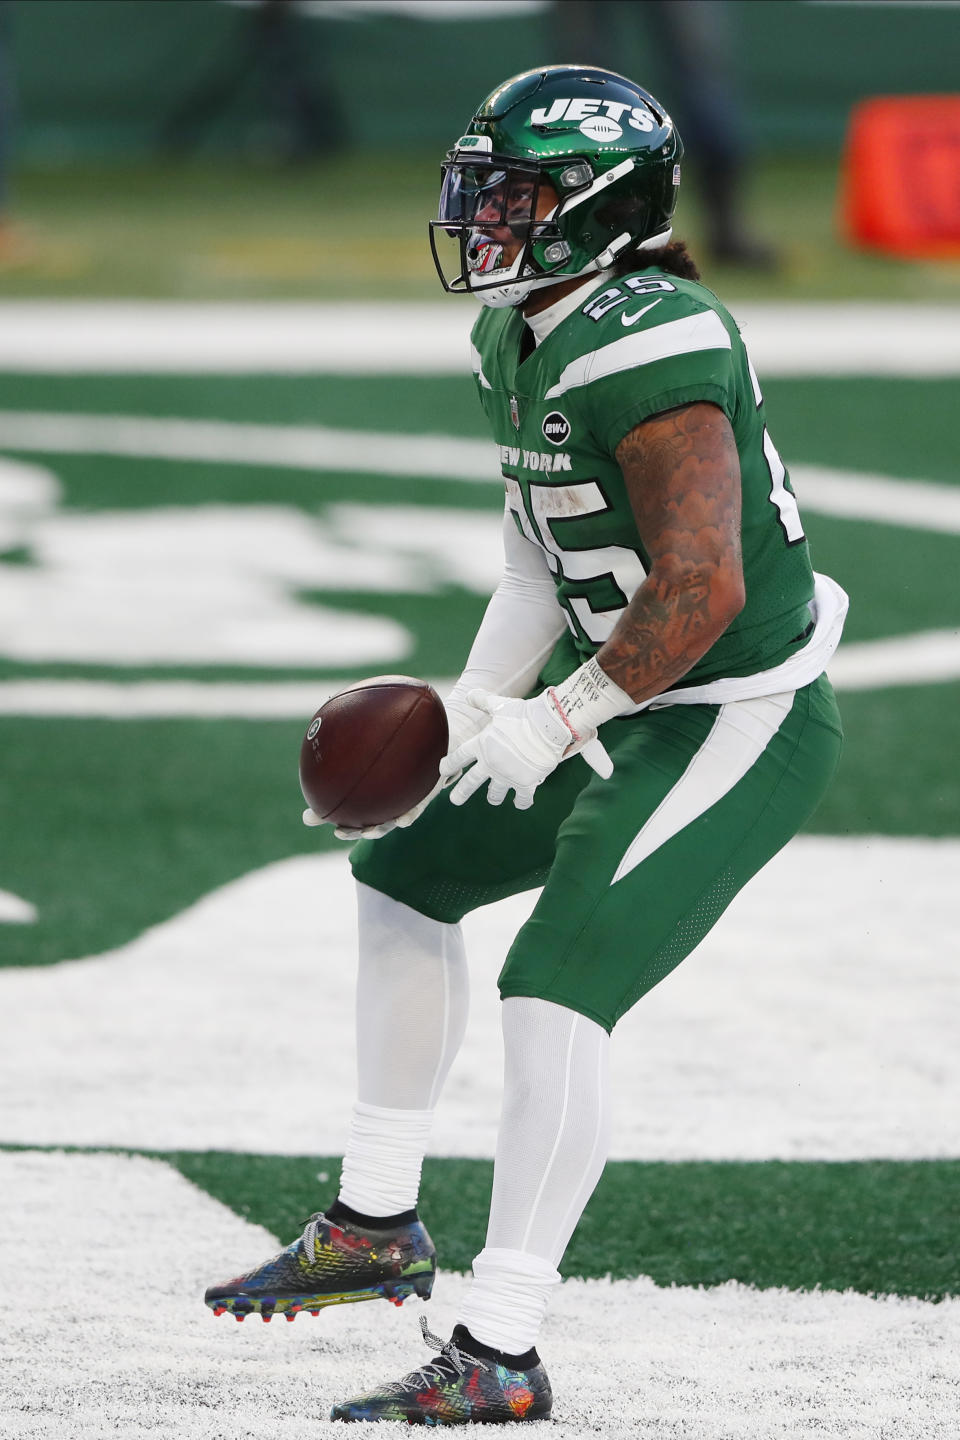 New York Jets' Ty Johnson celebrates his touchdown during the second half an NFL football game against the Las Vegas Raiders, Sunday, Dec. 6, 2020, in East Rutherford, N.J. (AP Photo/Noah K. Murray)